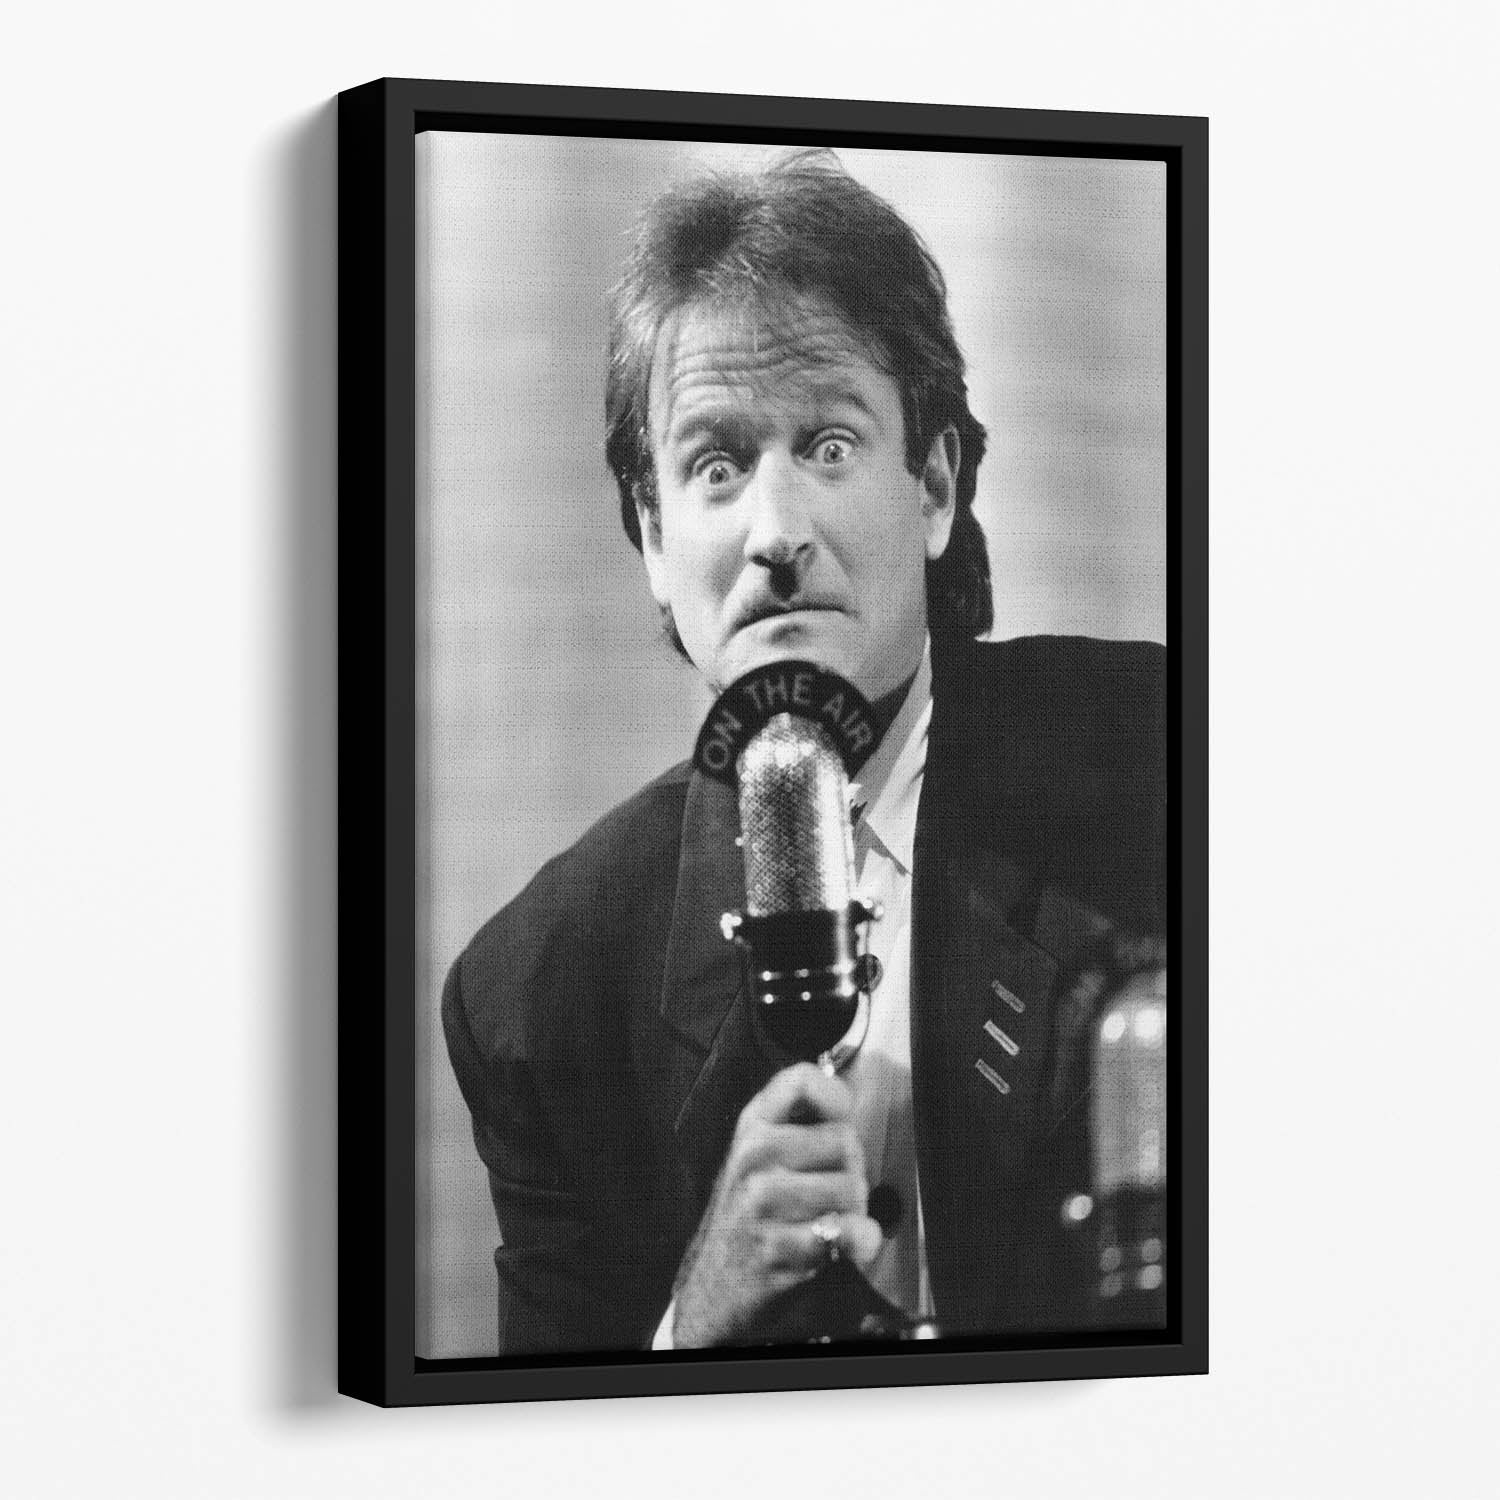 Robin Williams at the microphone Floating Framed Canvas